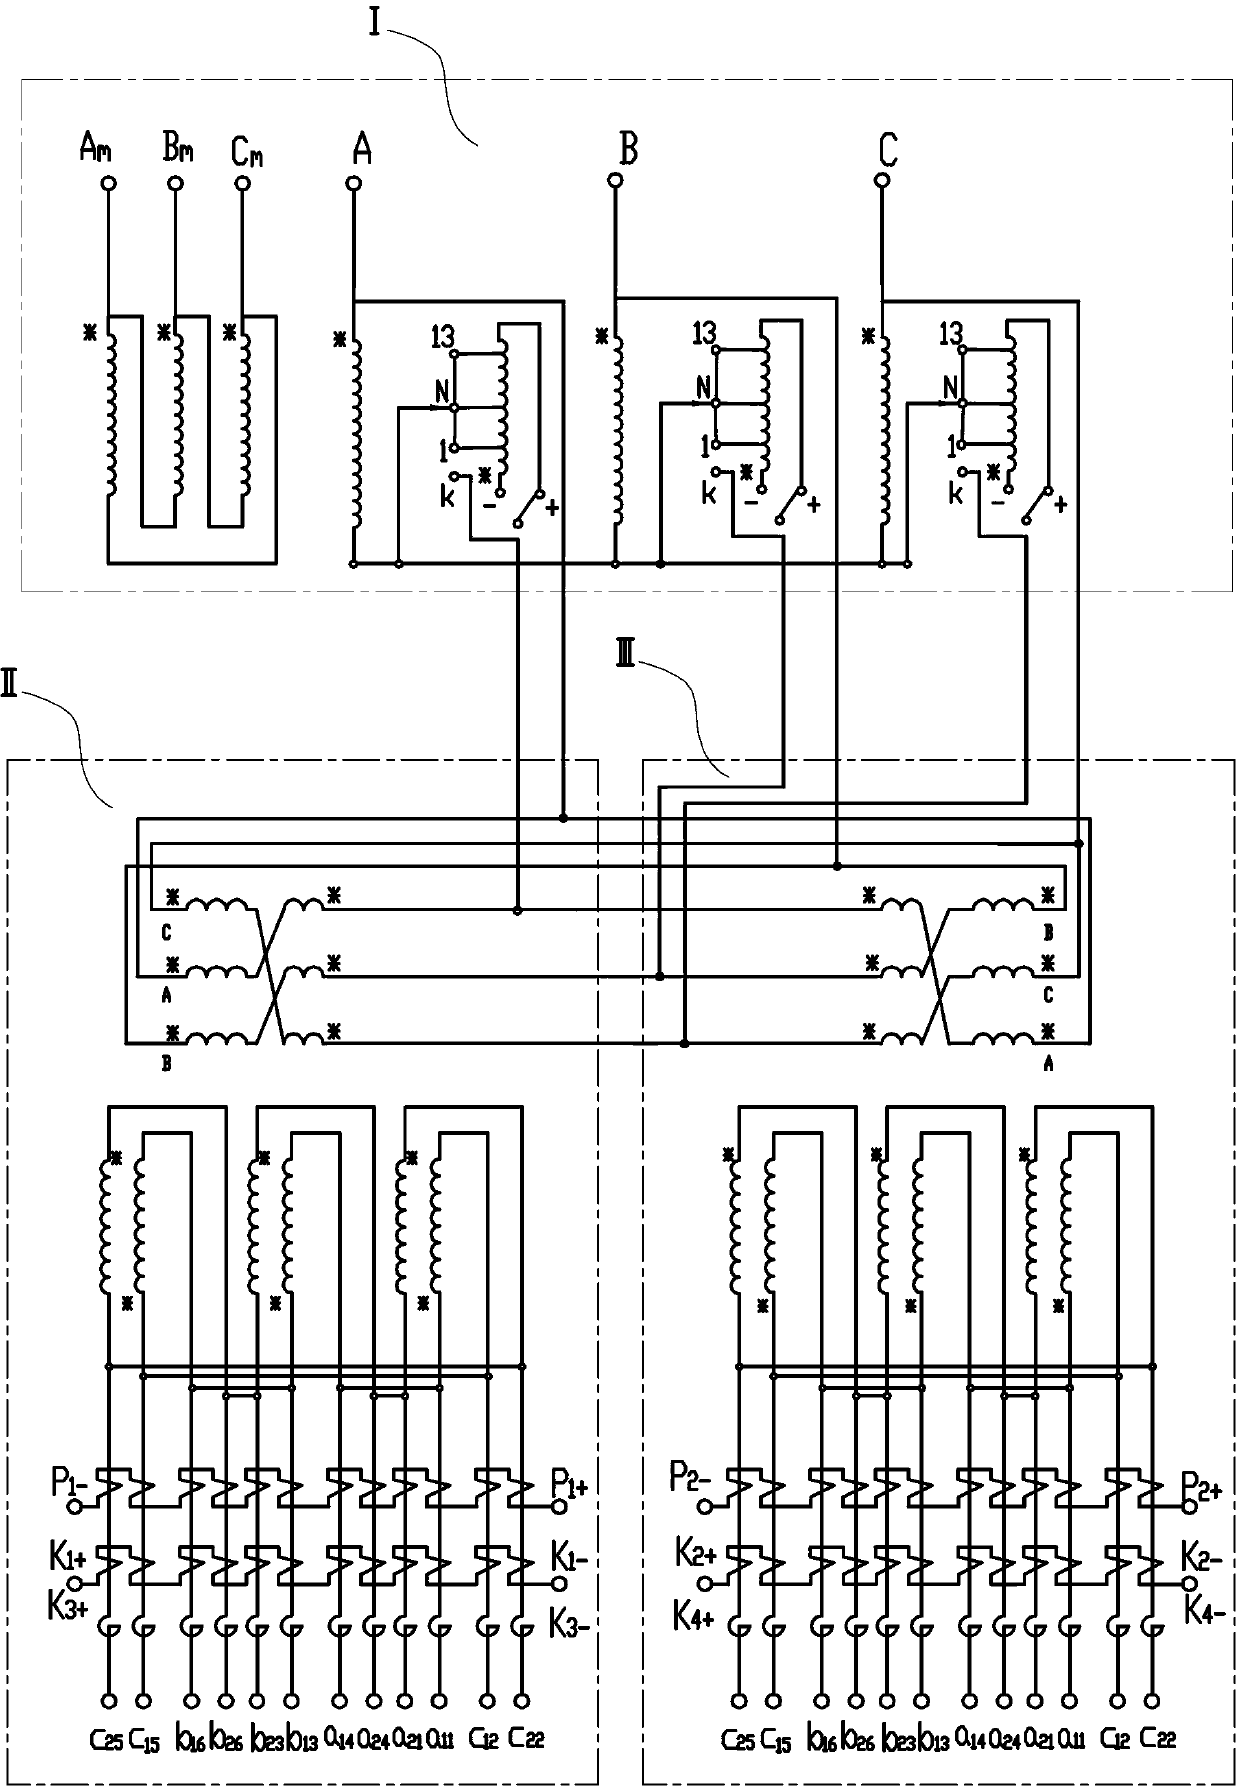 Novel on-load-tap-changing combined rectifier auto-transformer with independent ends